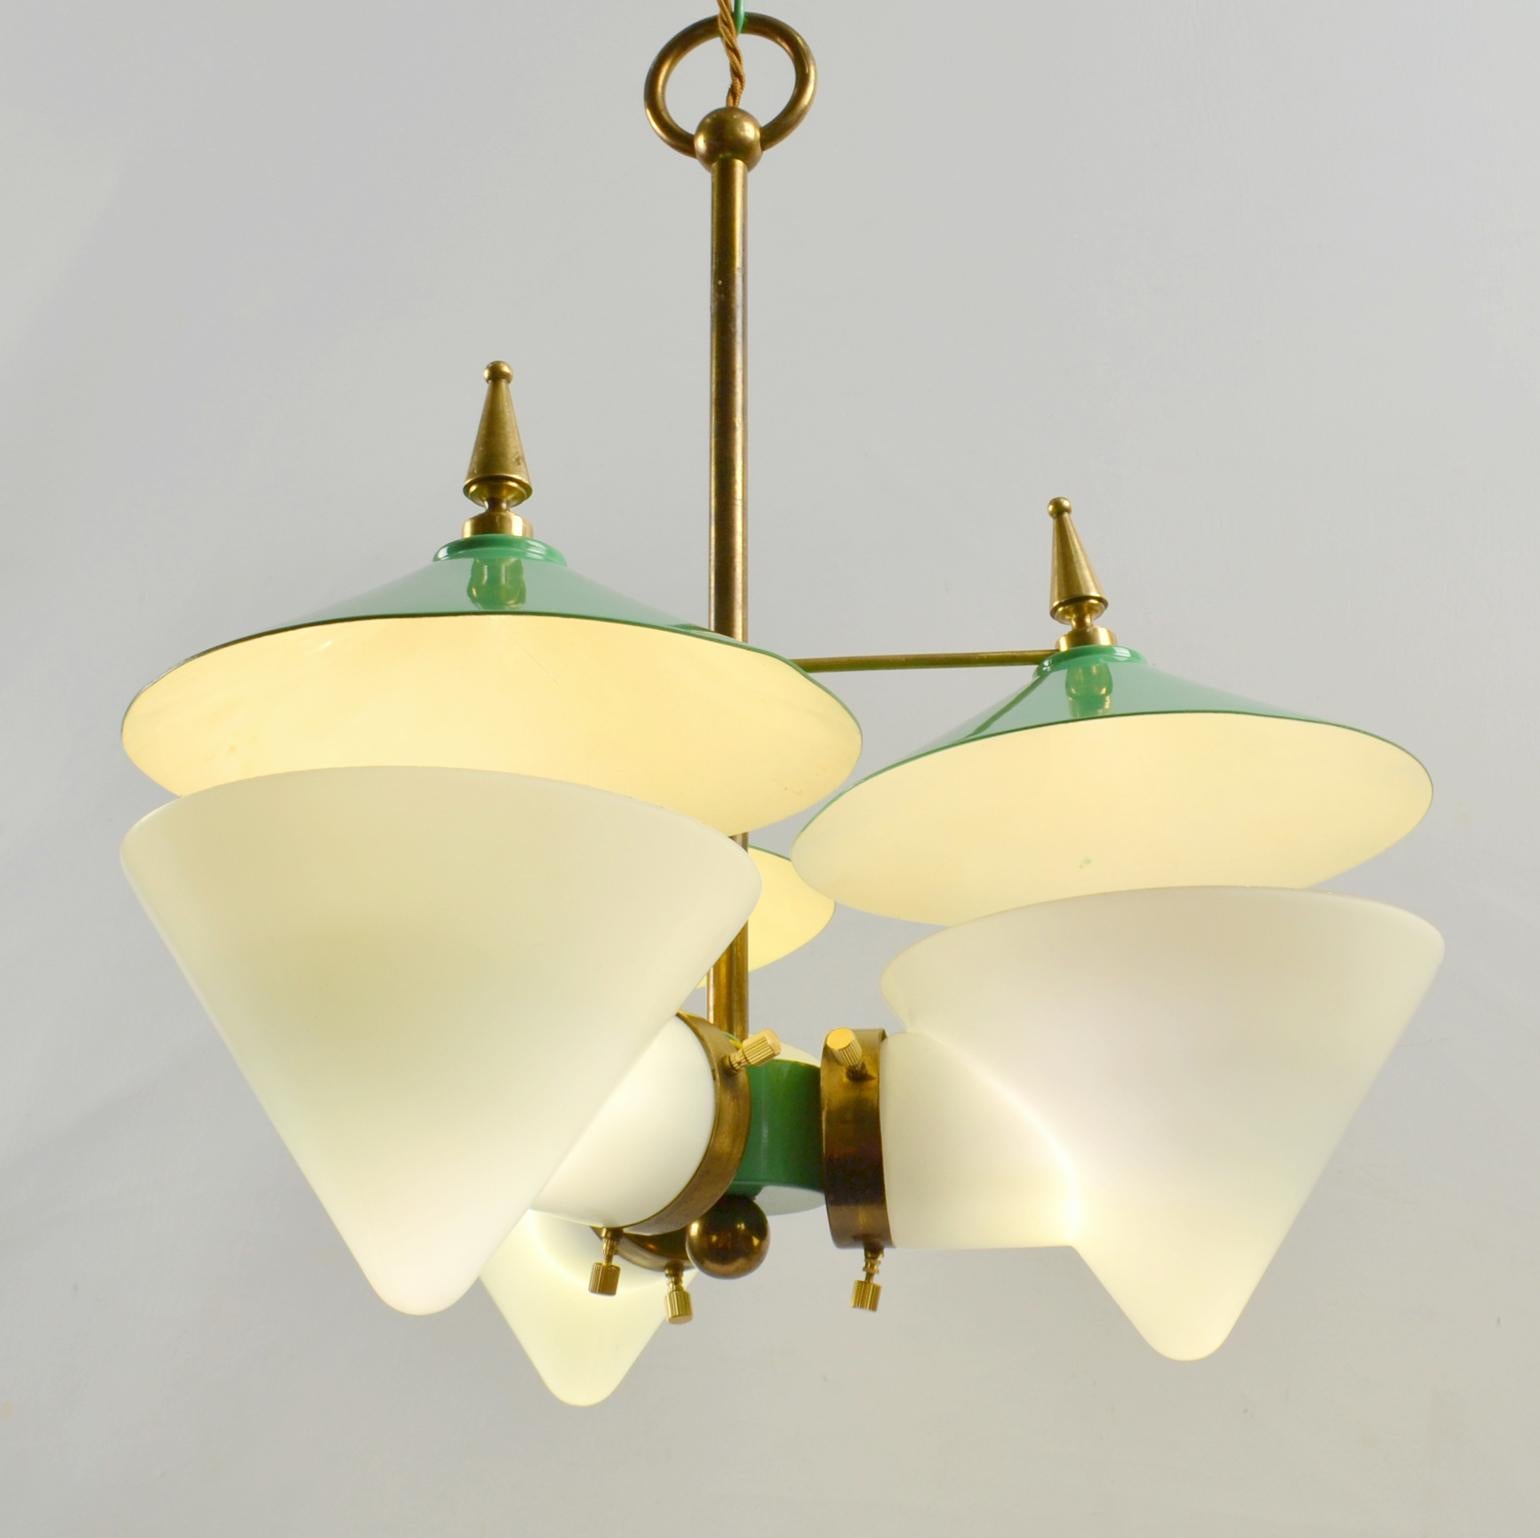 Three Arm Chandelier Green Metal, Opaline Glass Cones and Brass, Arlus 1950's  For Sale 3